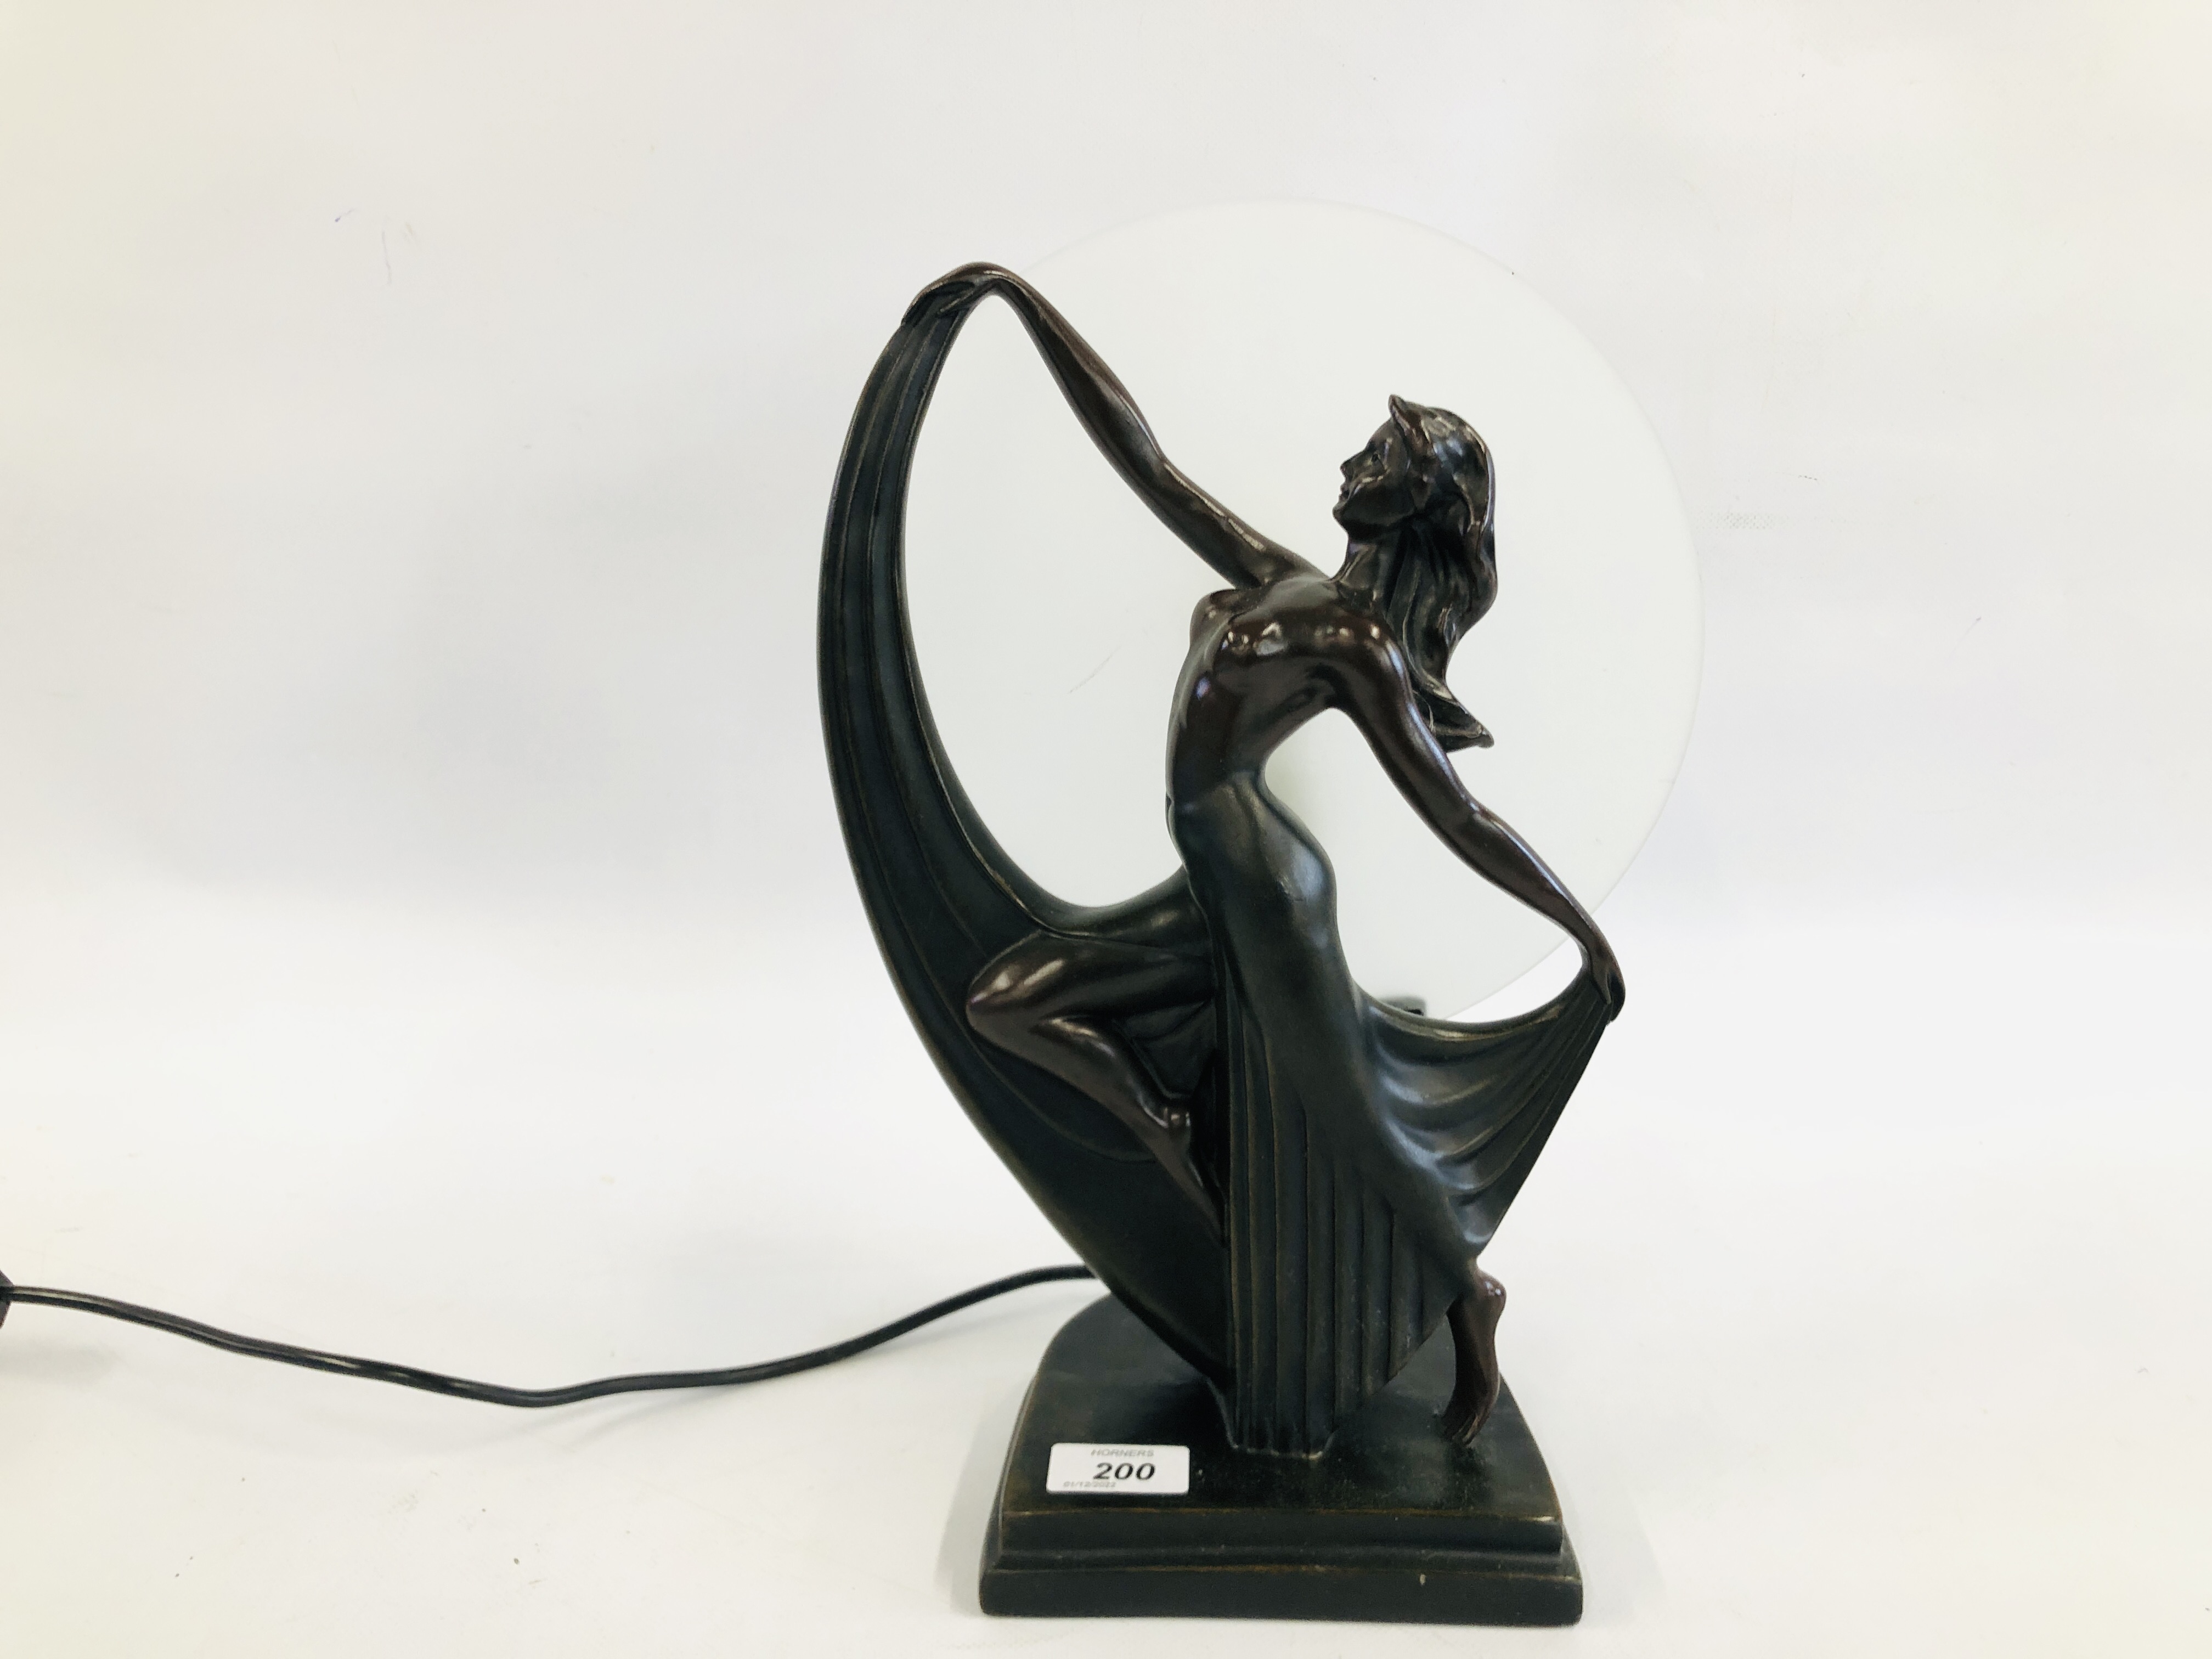 AN ART DECO STYLE FIGURED TABLE LAMP HEIGHT 37CM - - SOLD AS SEEN